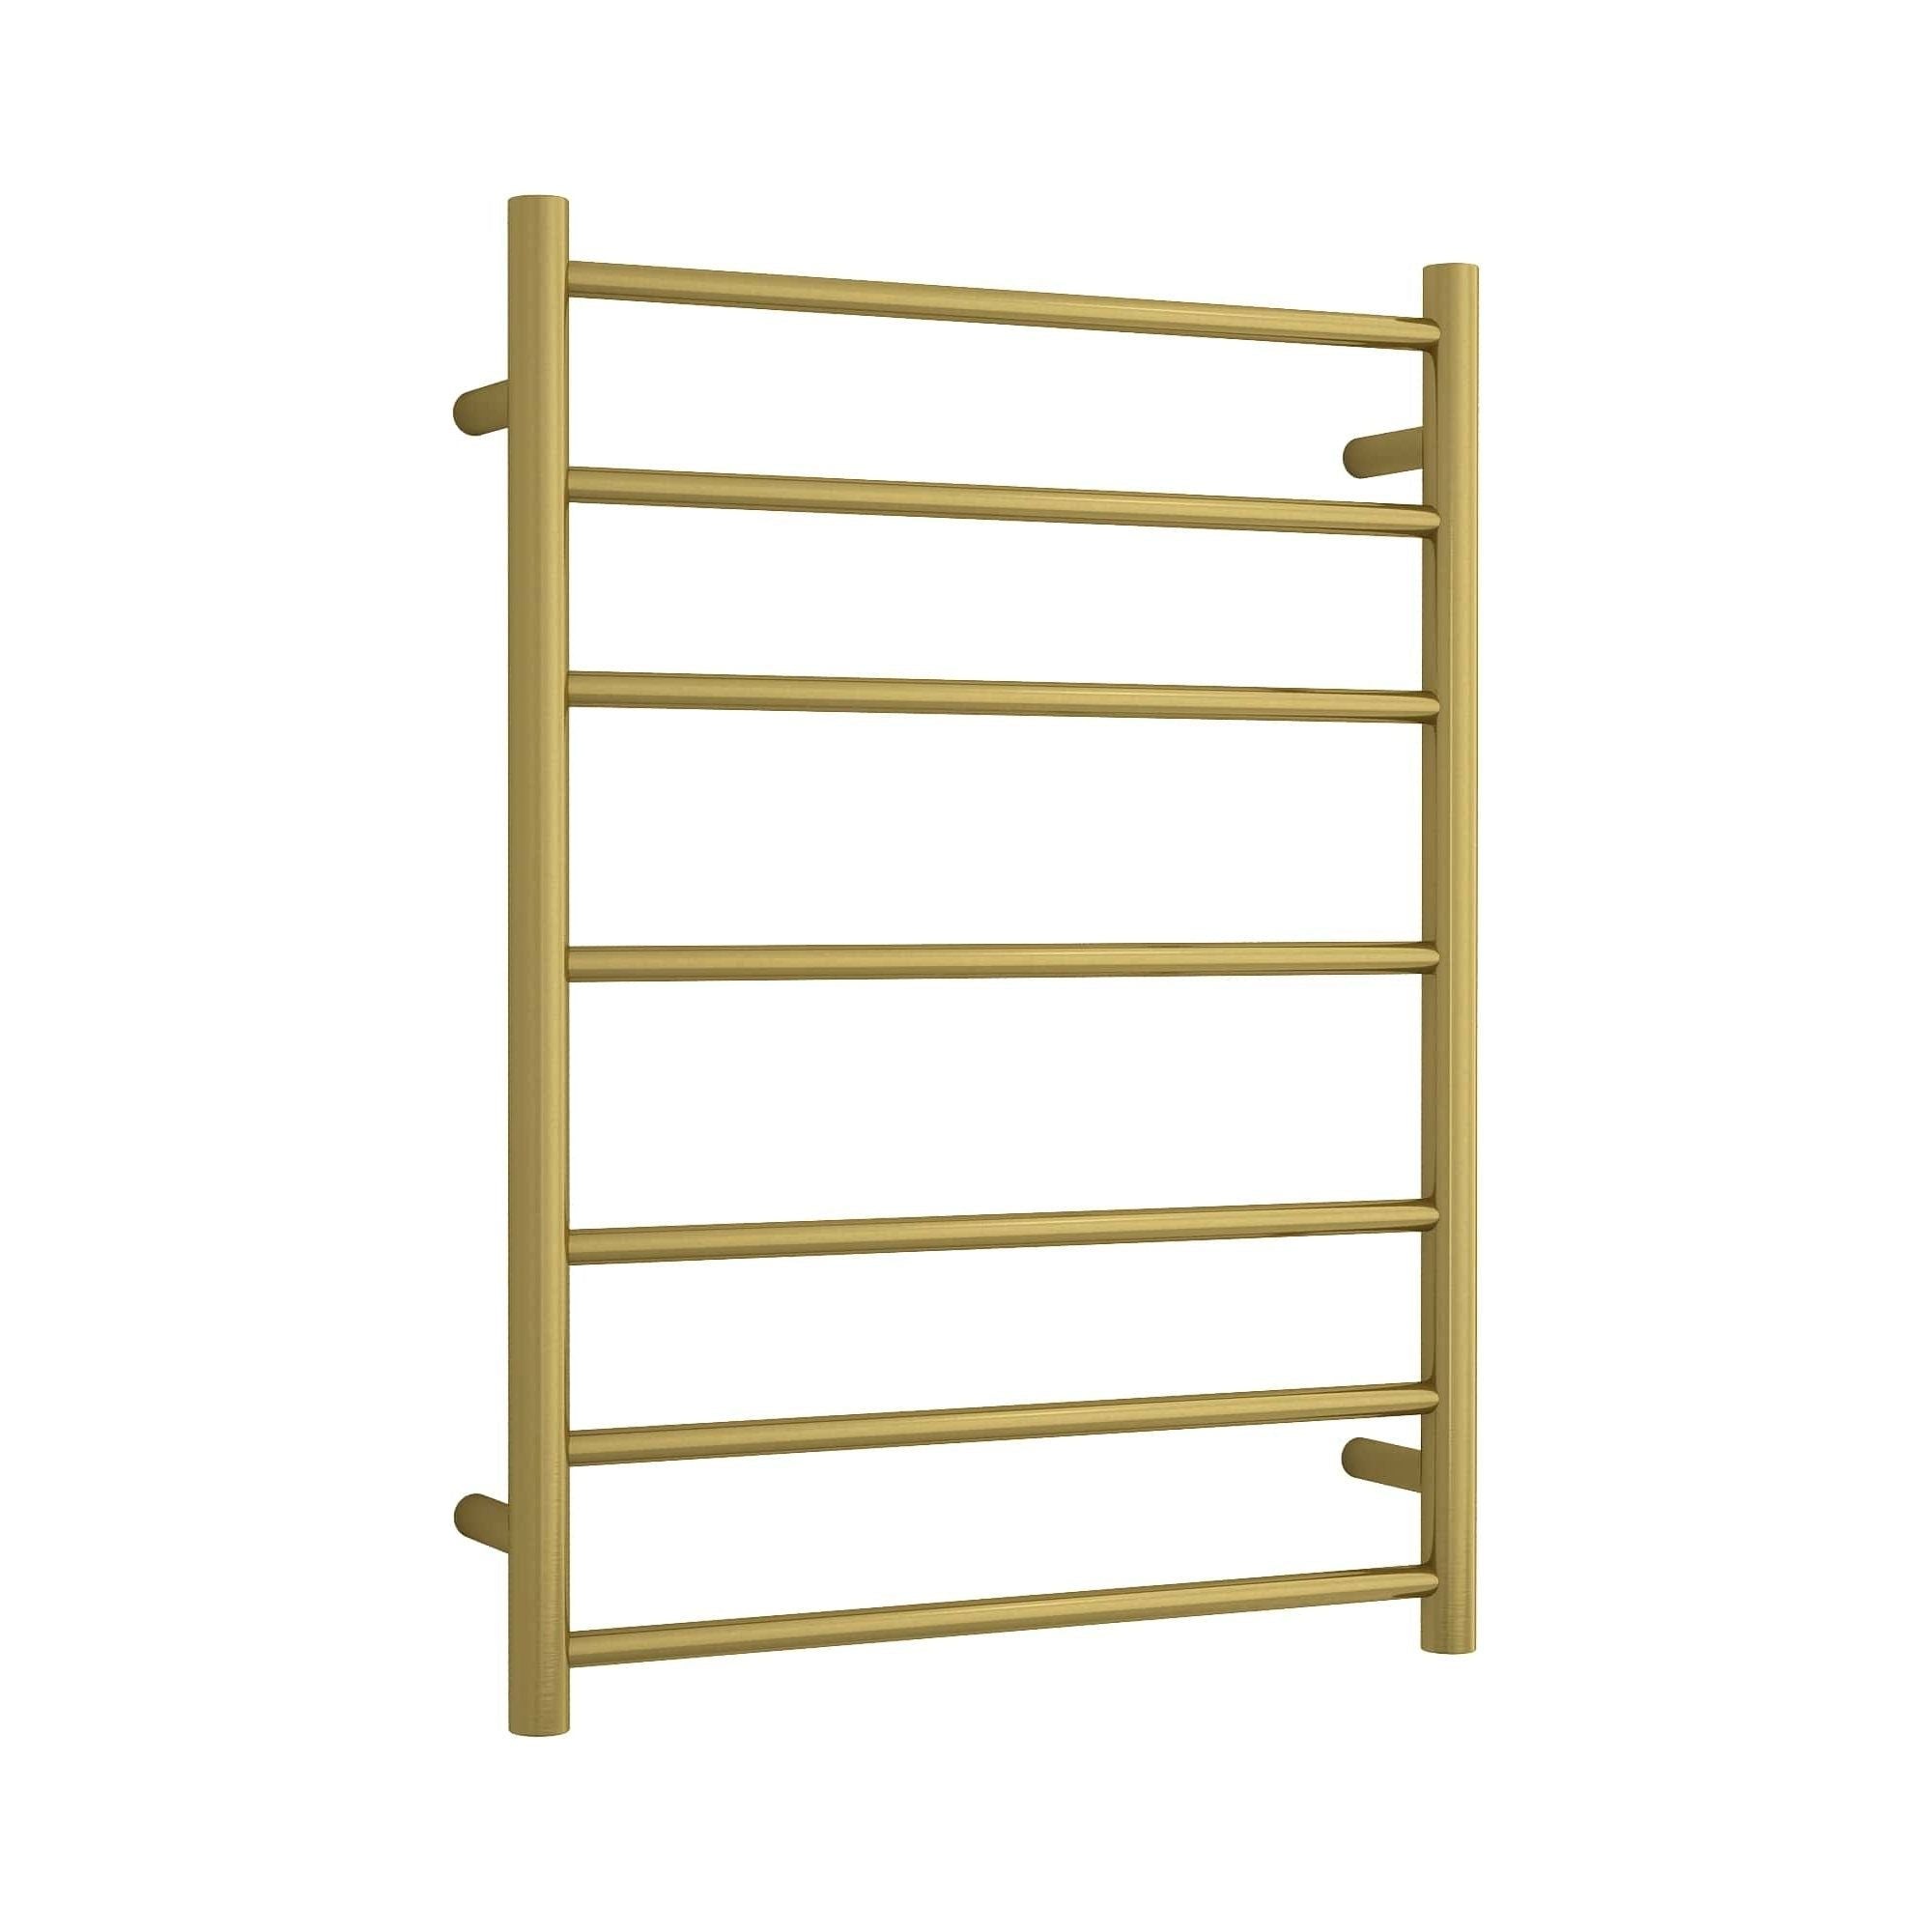 Brushed Gold Straight Round Ladder Heated Towel Rail